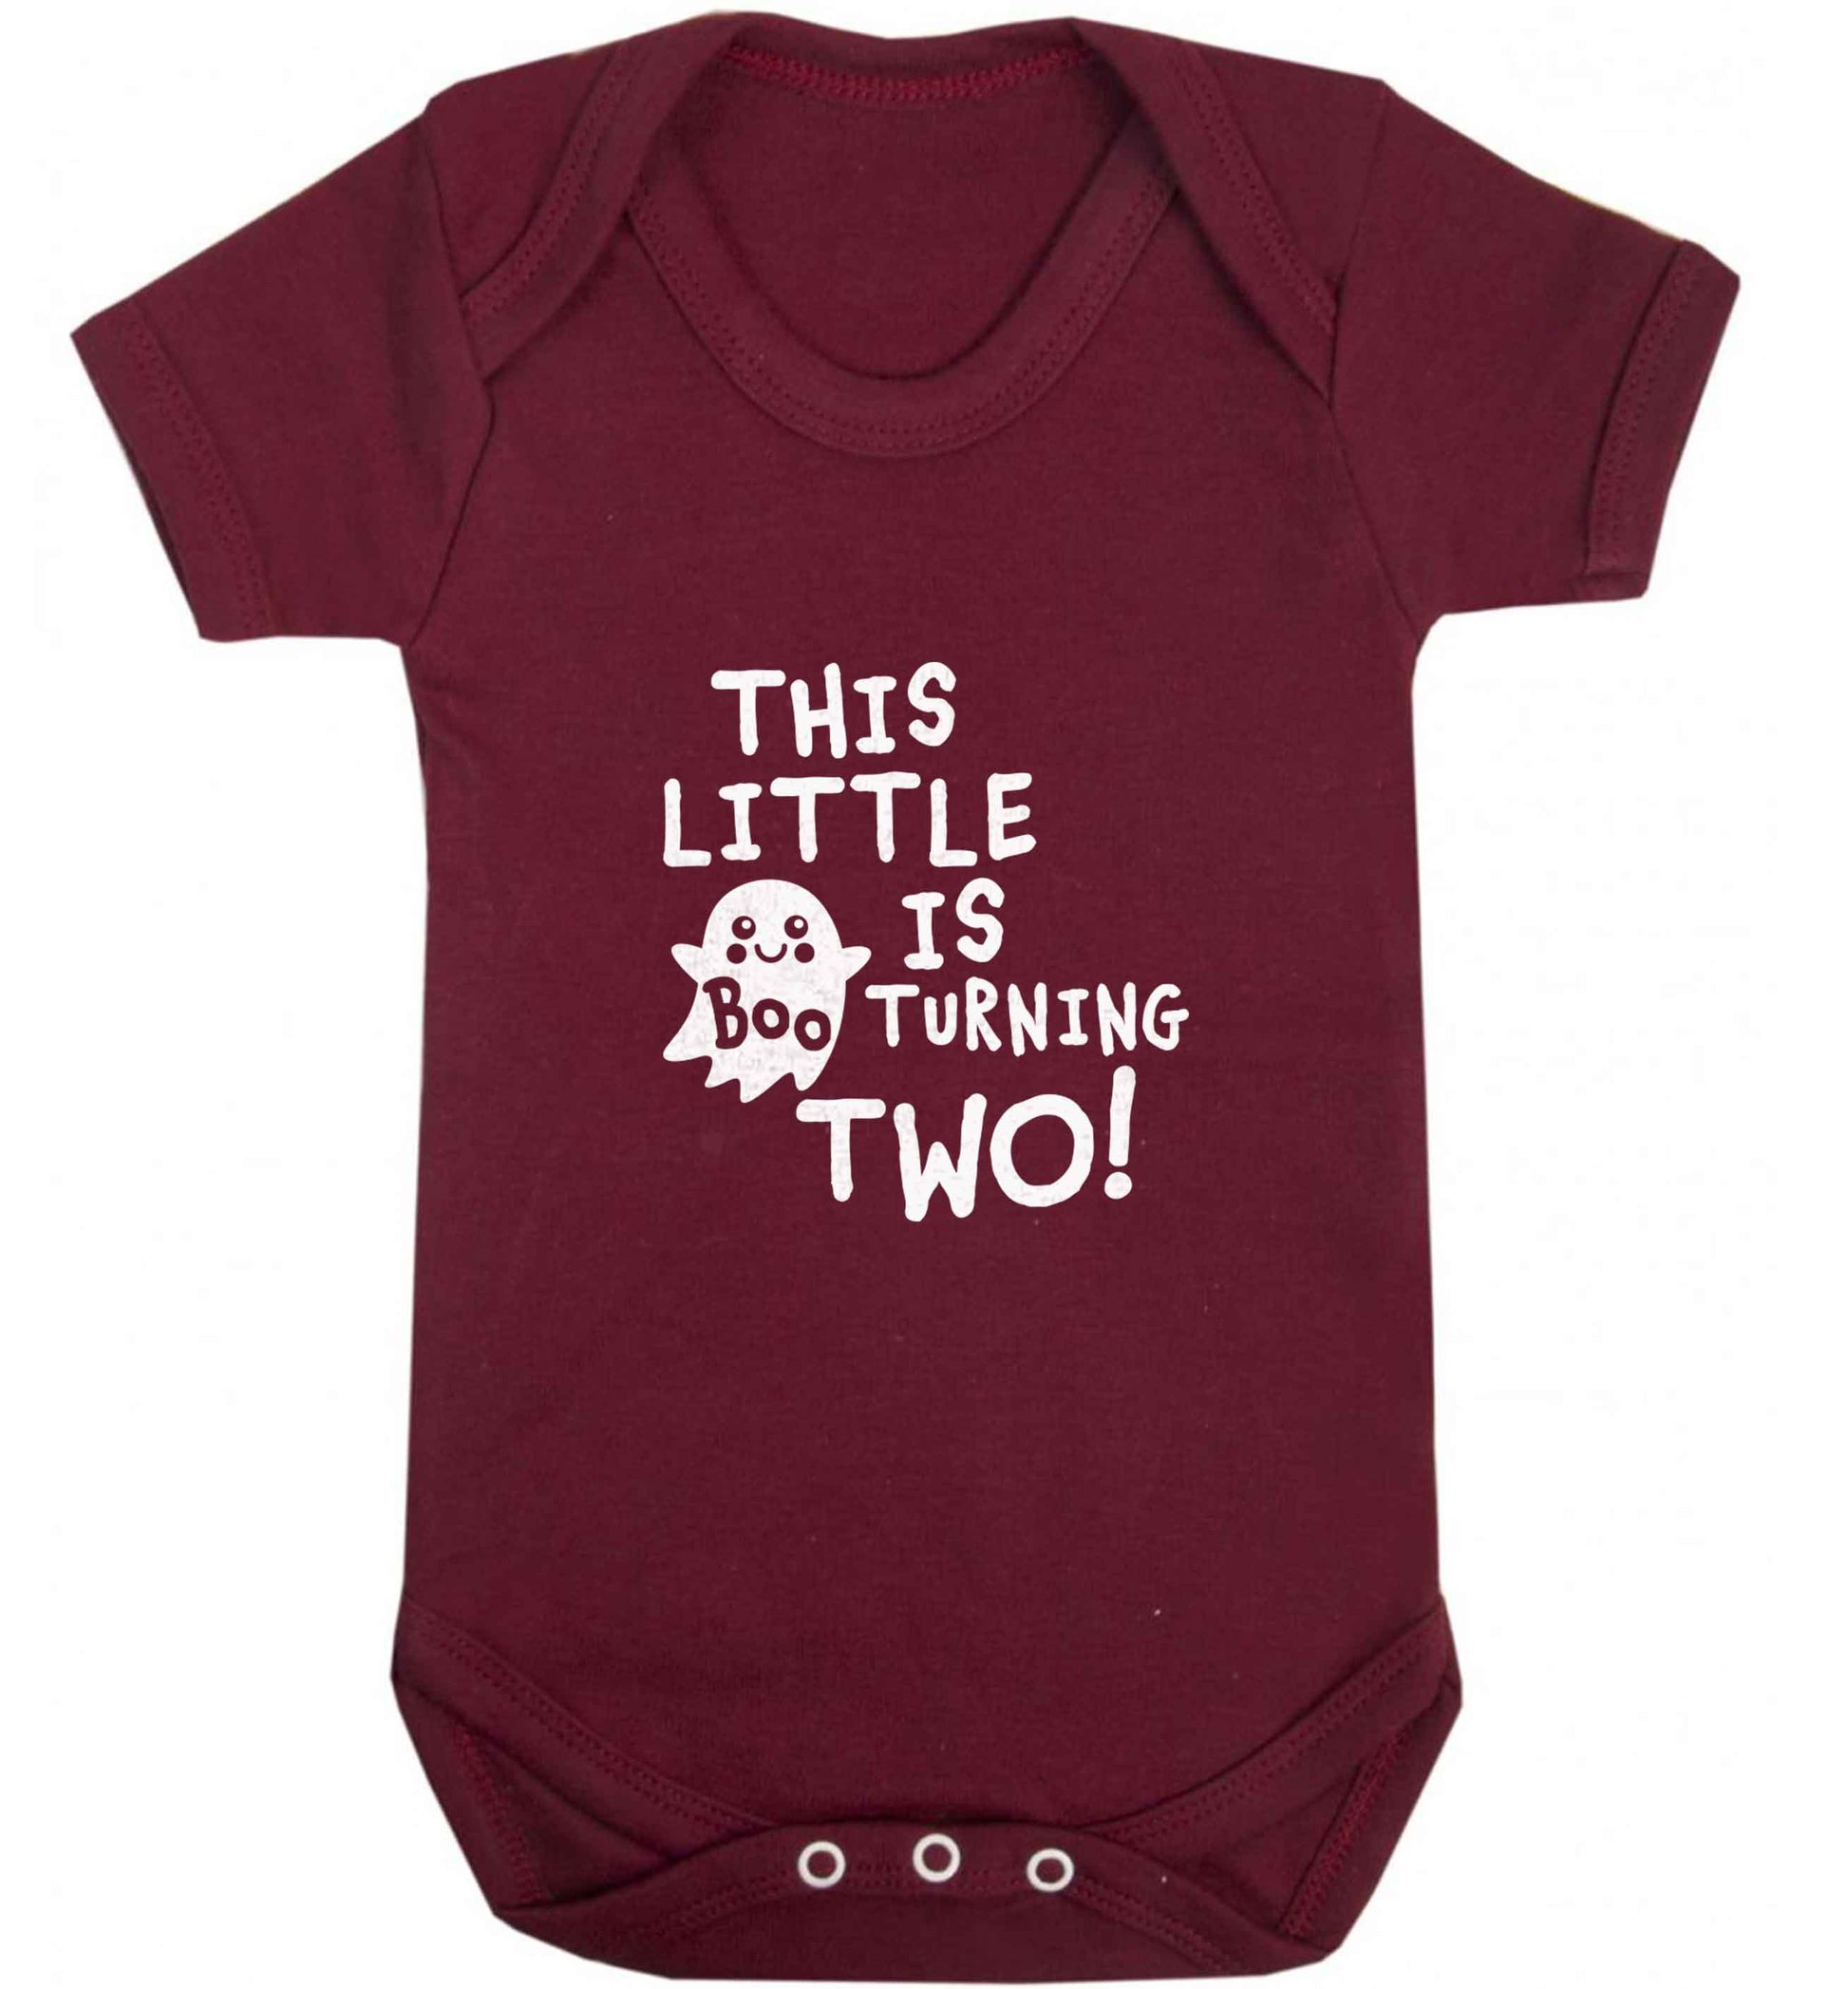 This little boo is turning two baby vest maroon 18-24 months